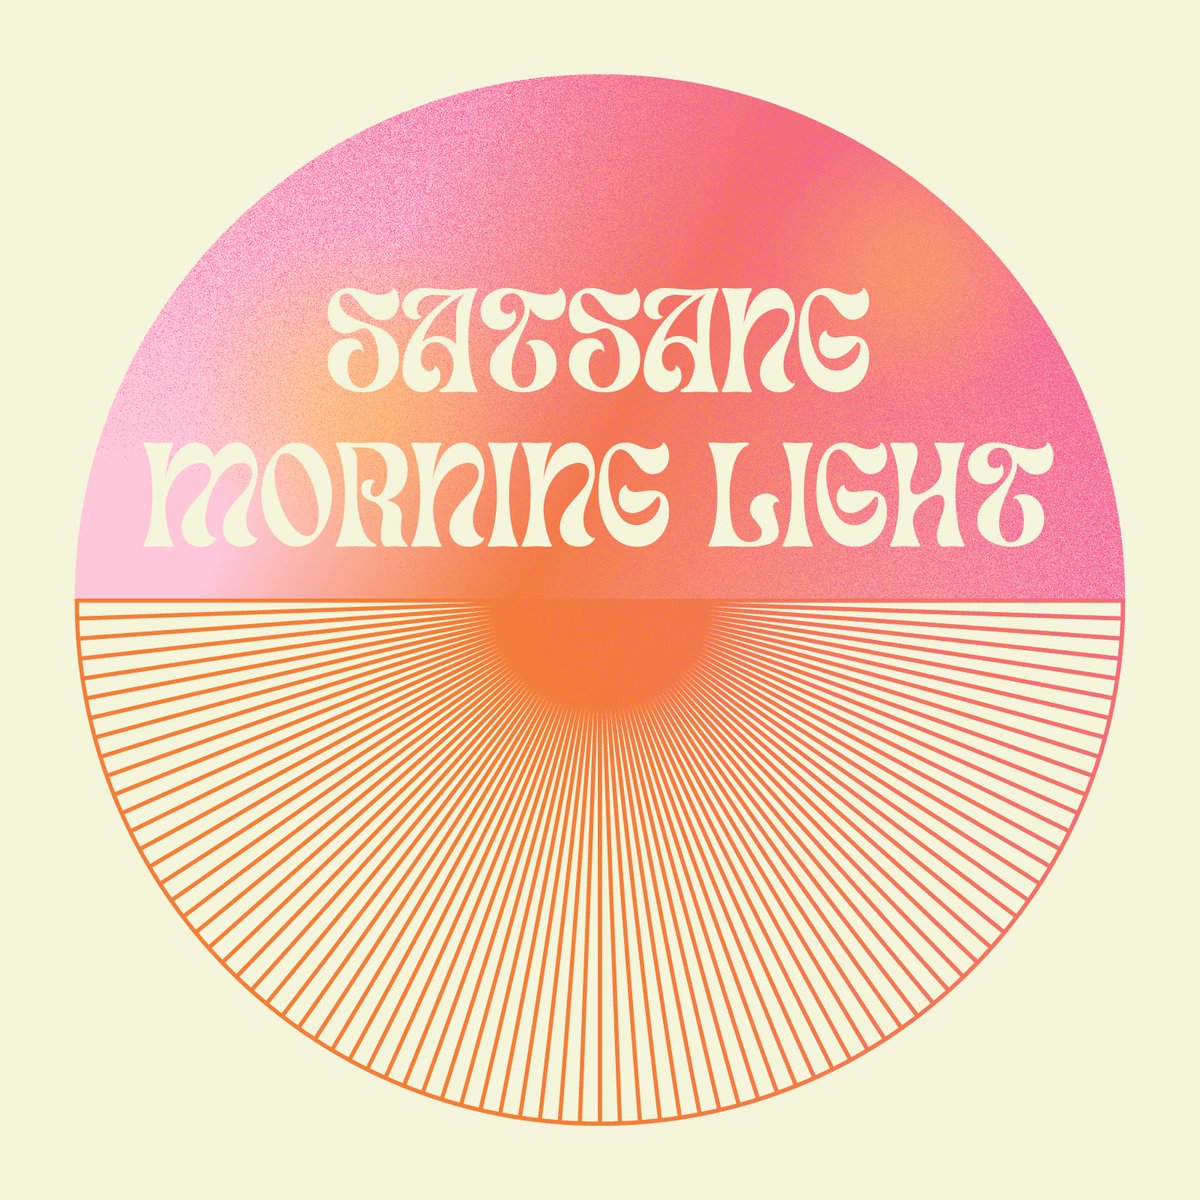 Our new single 'Morning Light' is OUT NOW wherever you find your music. Listen, share, enjoy! 🎧 - satsang.ffm.to/morninglight